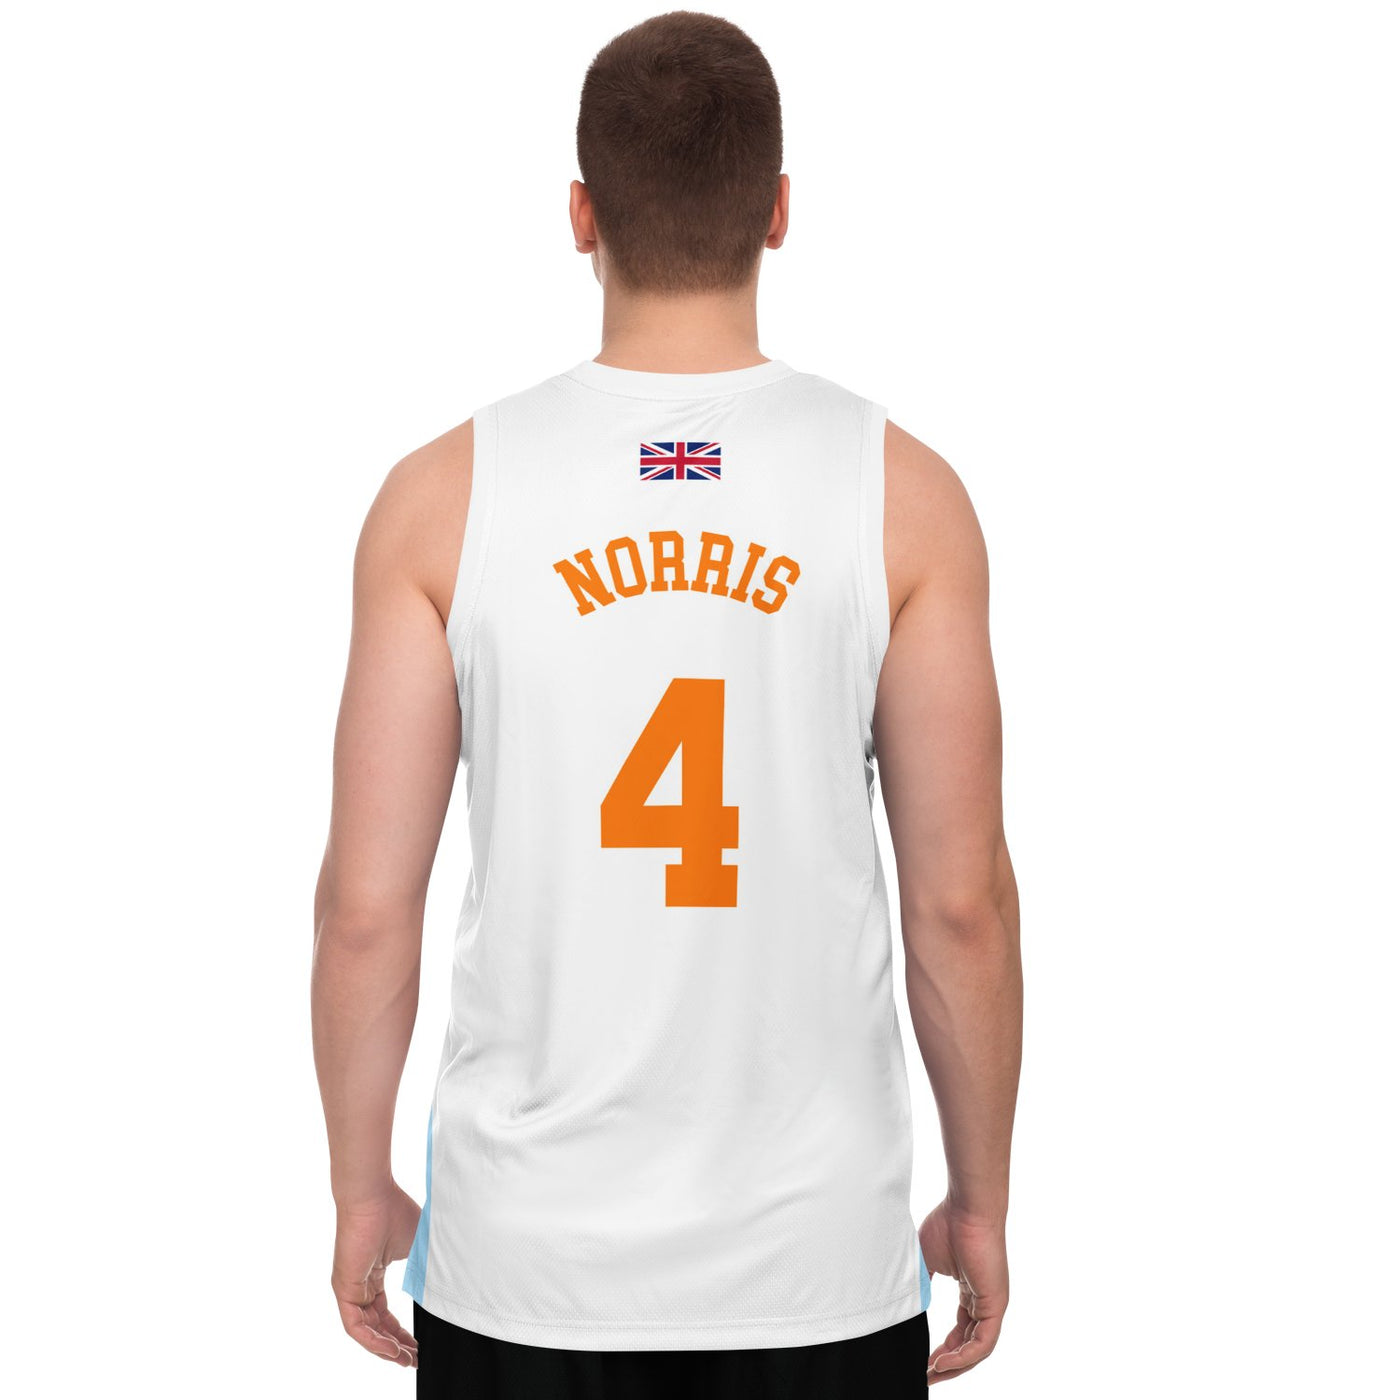 Norris - Home White Classic Edition Jersey (Clearance) - Furious Motorsport